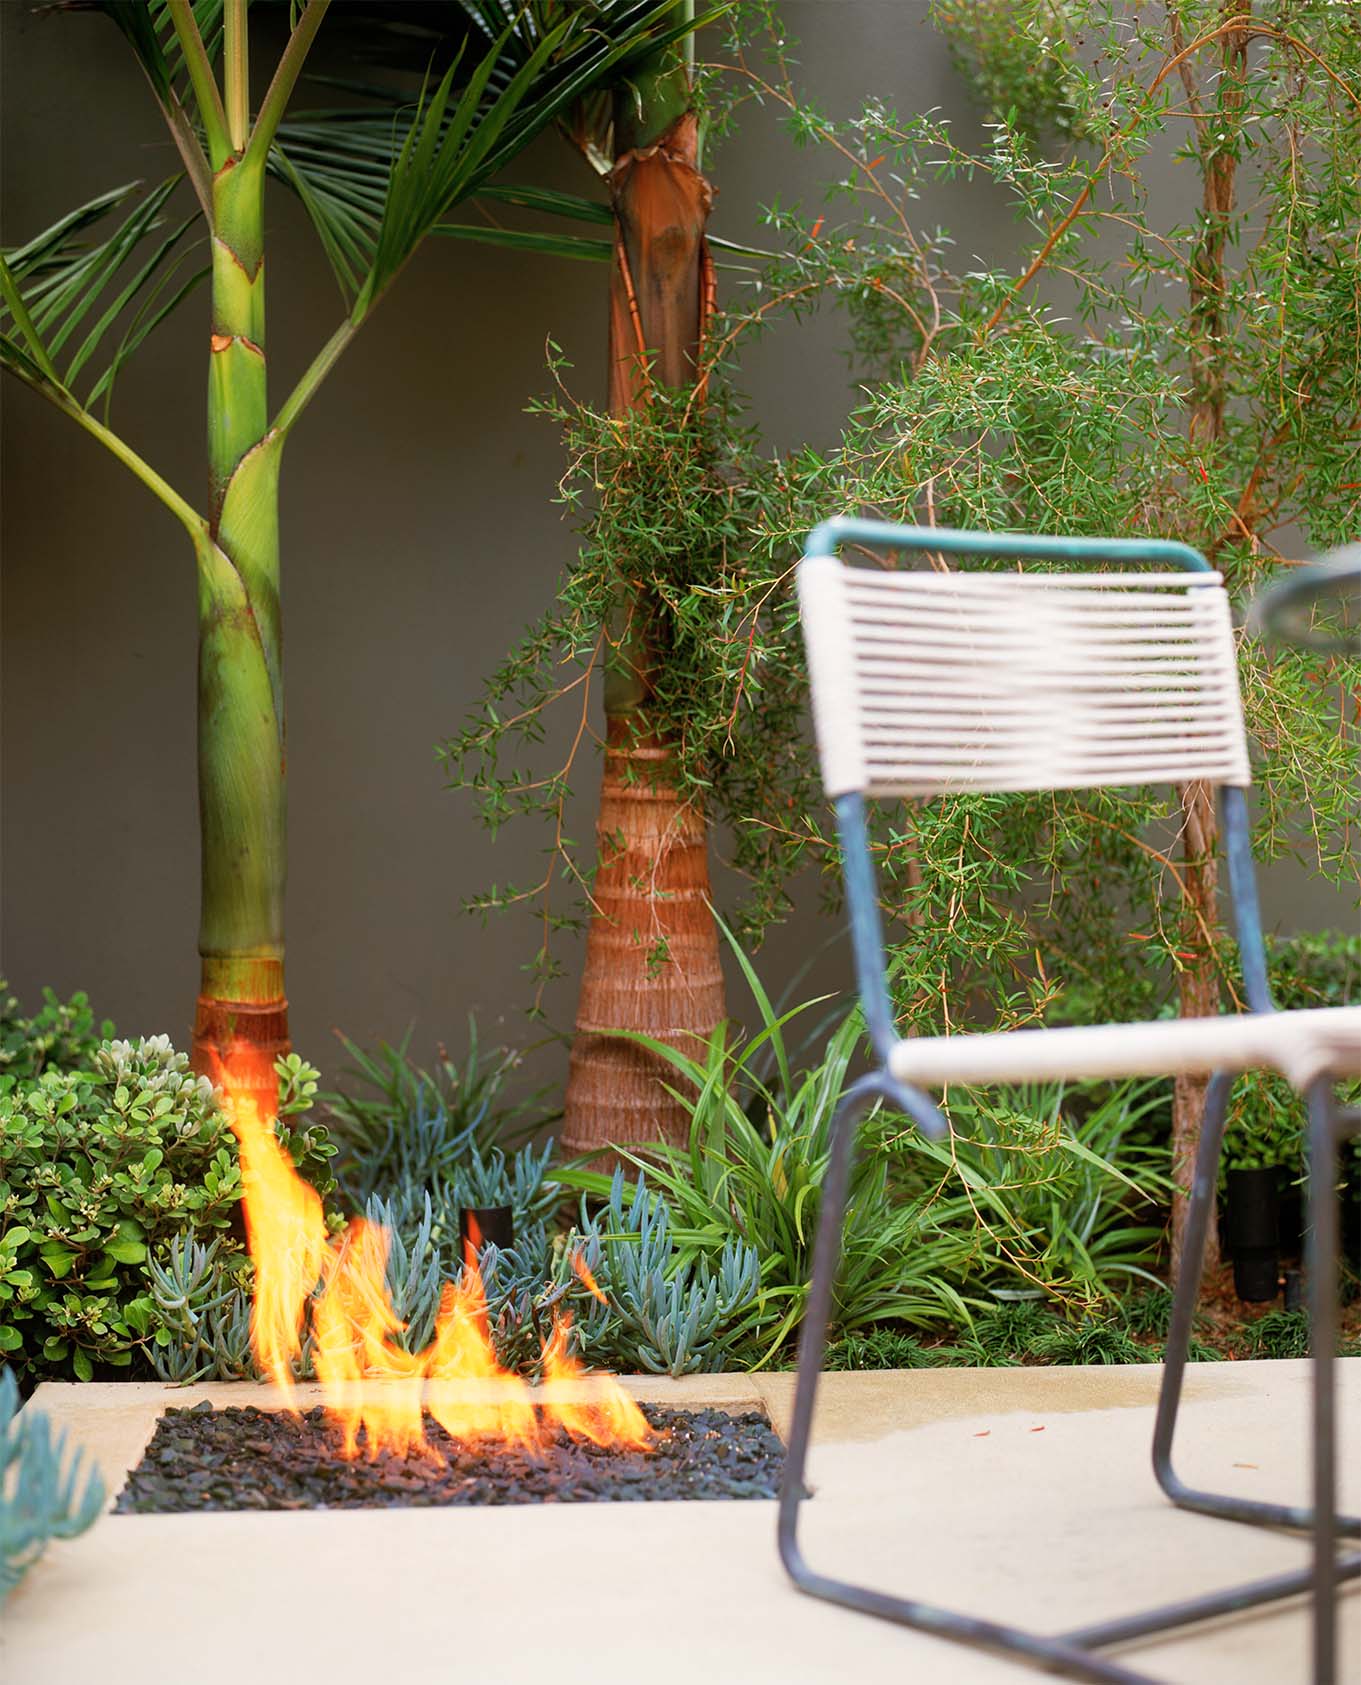 Patio Firepit: A recessed gas fire pit provides warmth on cool evenings, and may be covered when not in use.